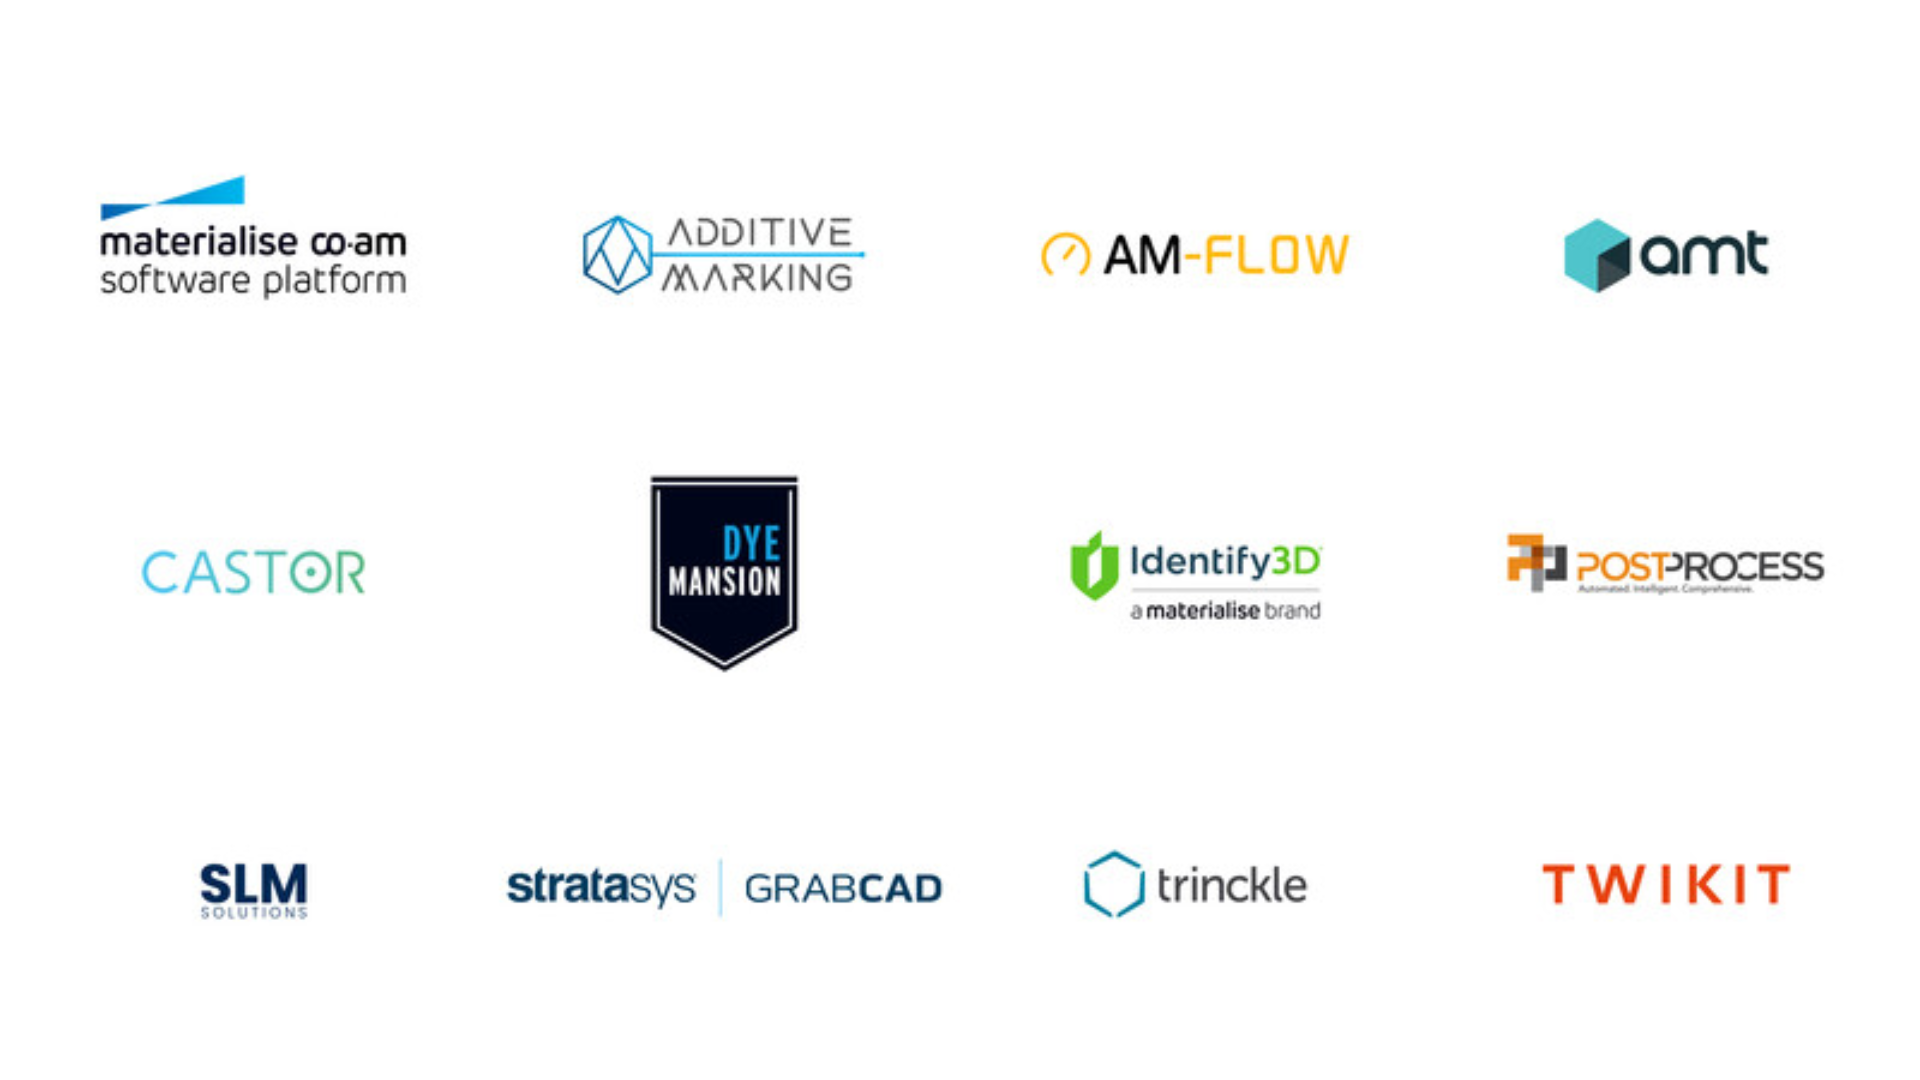 Seven technology partners joined the CO-AM platform for design and pre-printing automation, traceability, printing, and post-processing